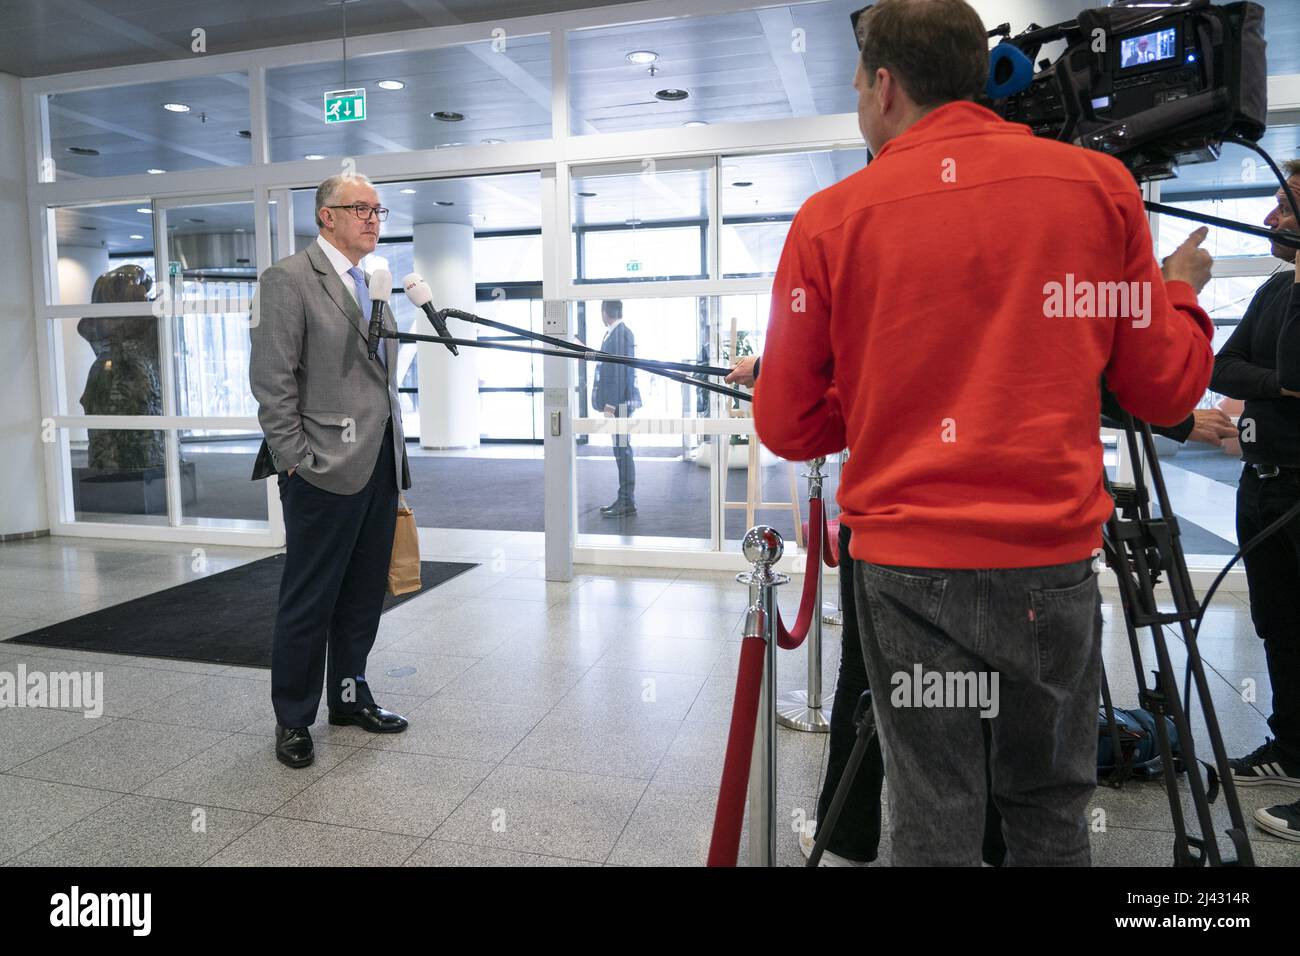 Mayor Of Rotterdam High Resolution Stock Photography and Images - Alamy